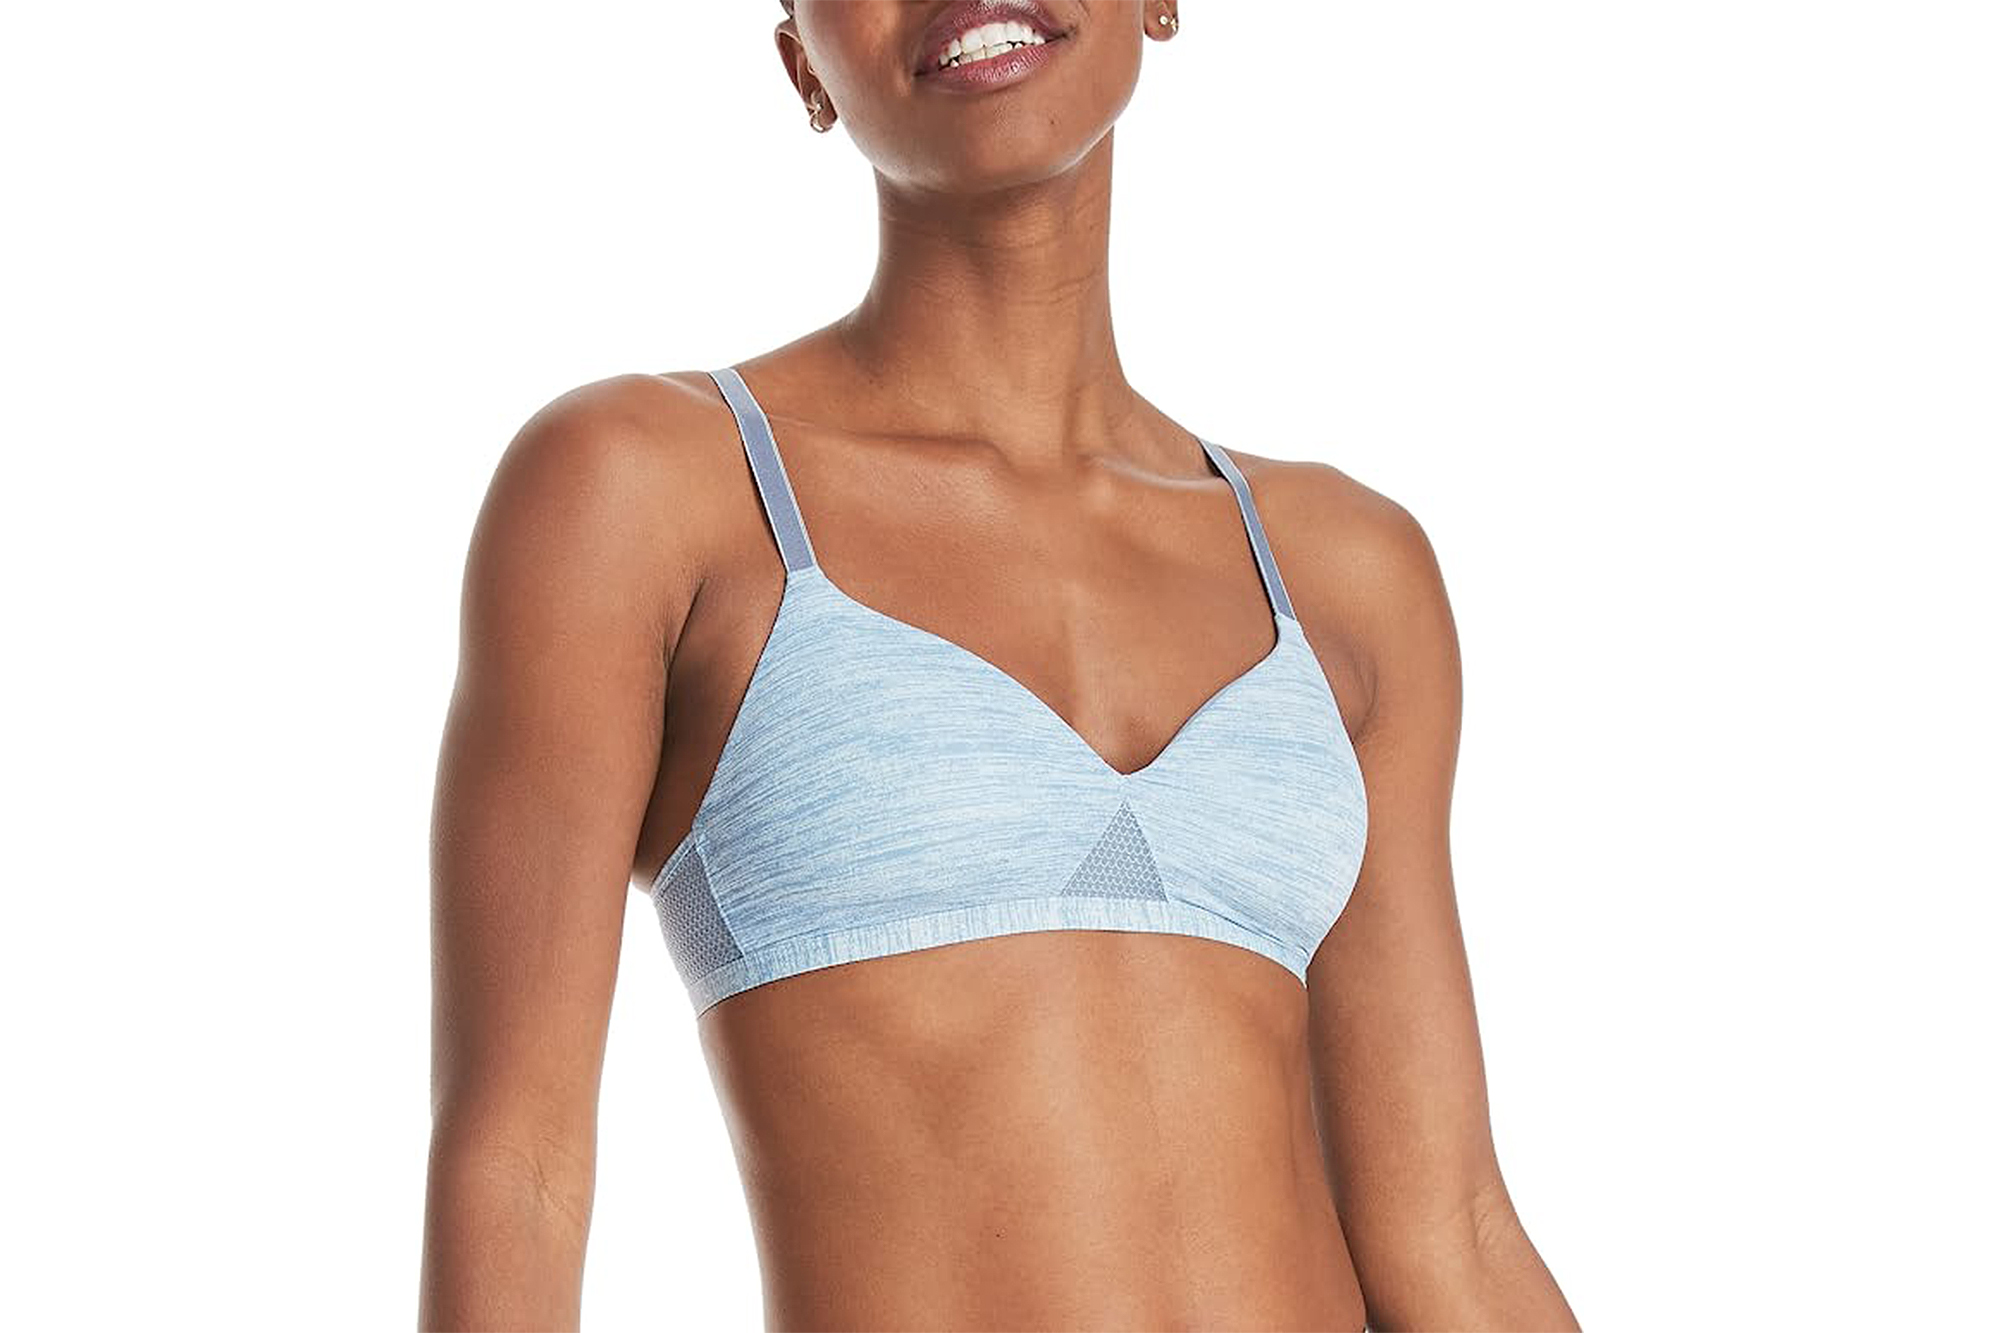 Hanes Sports Bra For Womens - Get Best Price from Manufacturers